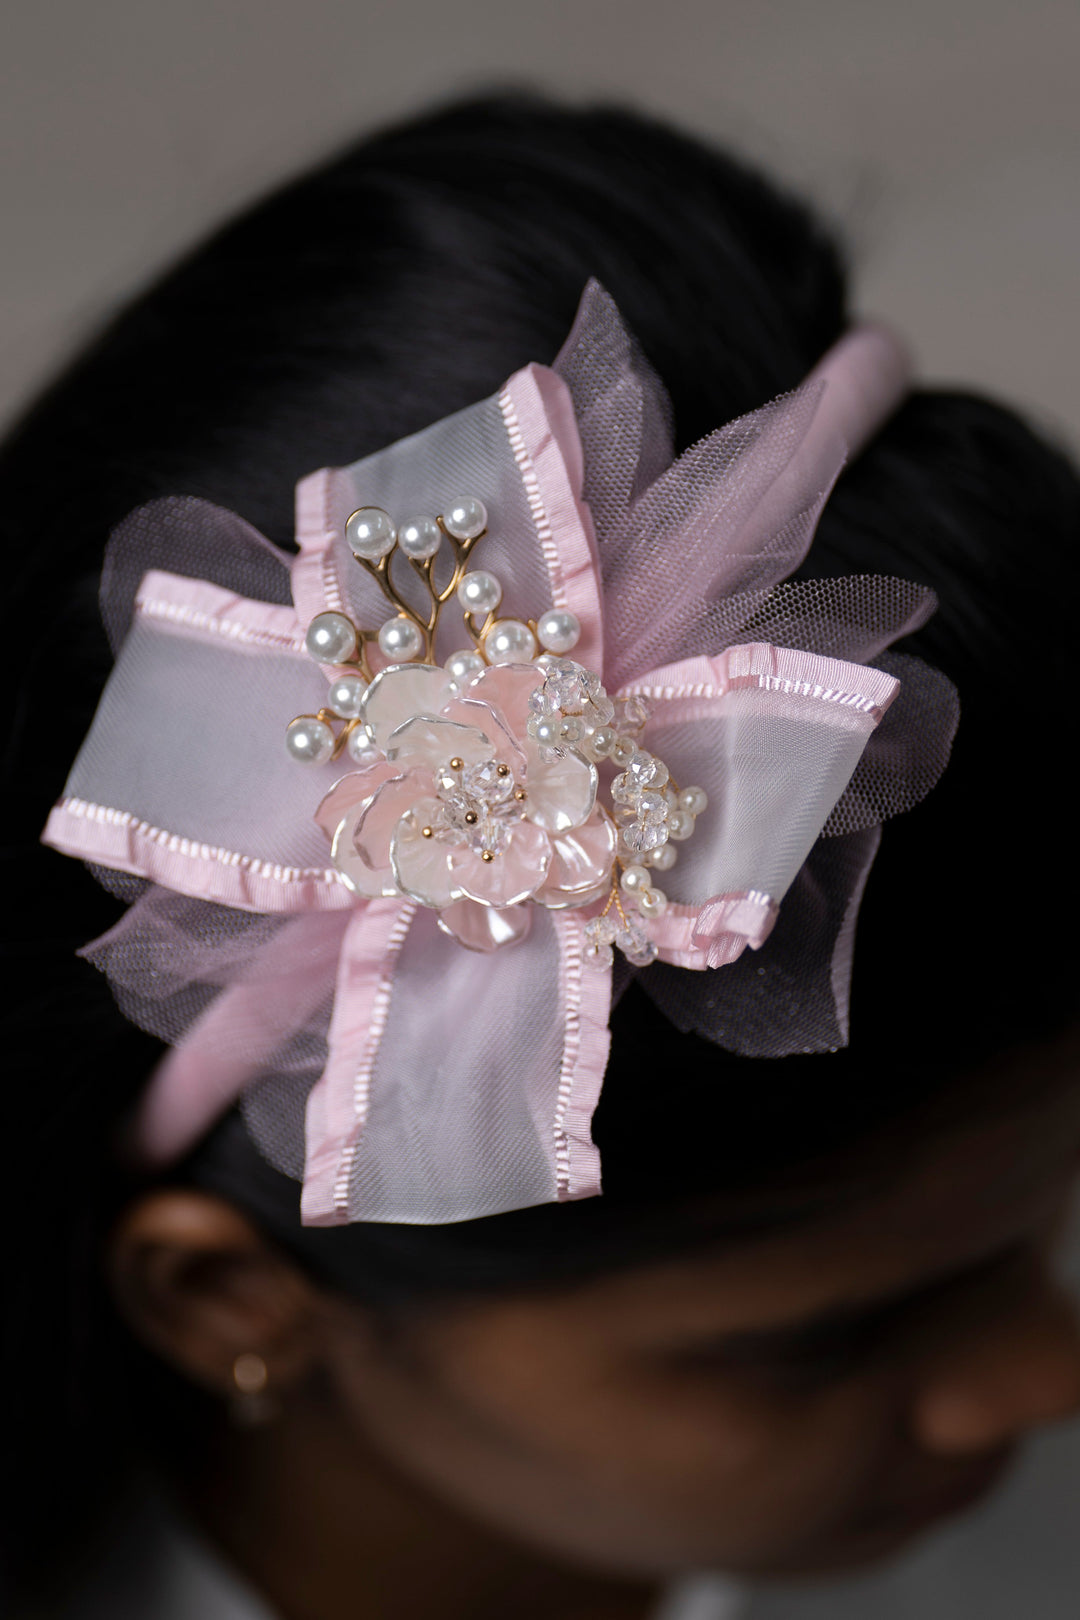 The Nesavu Hair Band Blush Pink Tulle Hairbow with Pearl Flower Centerpiece Nesavu Pink JHB77E Pearl and Crystal Pink Tulle Hairbow | Hair Accessory for Graceful Styles | The Nesavu